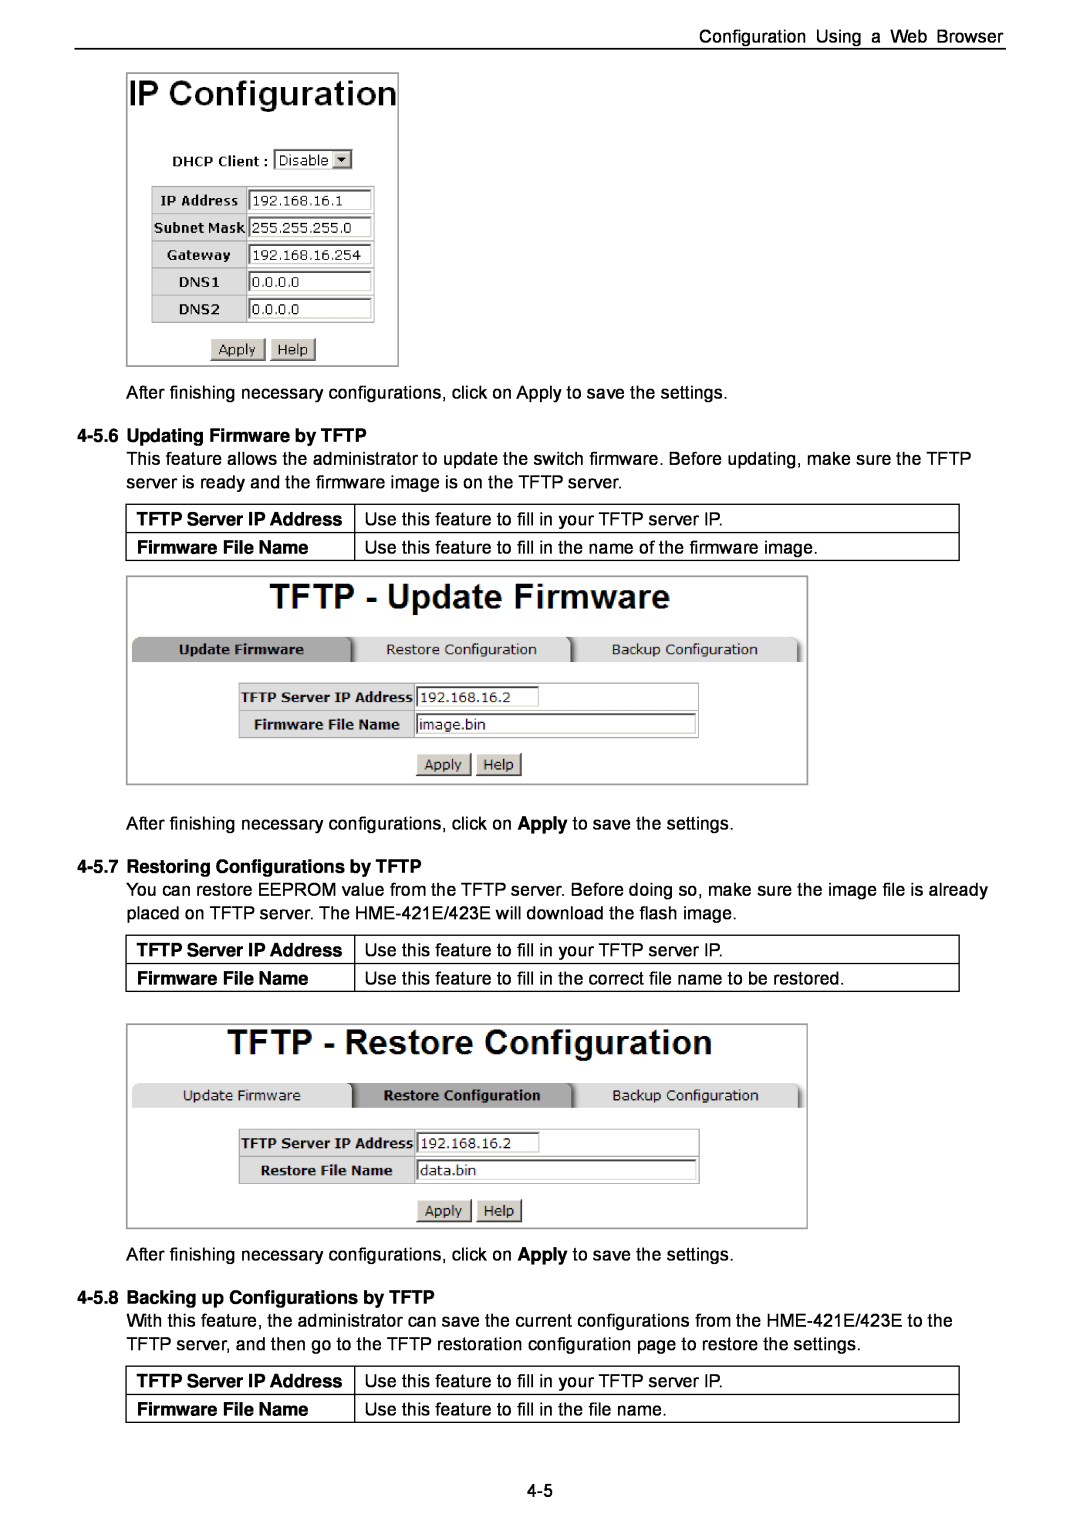 Husky HME-423E, HME-421E Updating Firmware by TFTP, Restoring Configurations by TFTP, Backing up Configurations by TFTP 